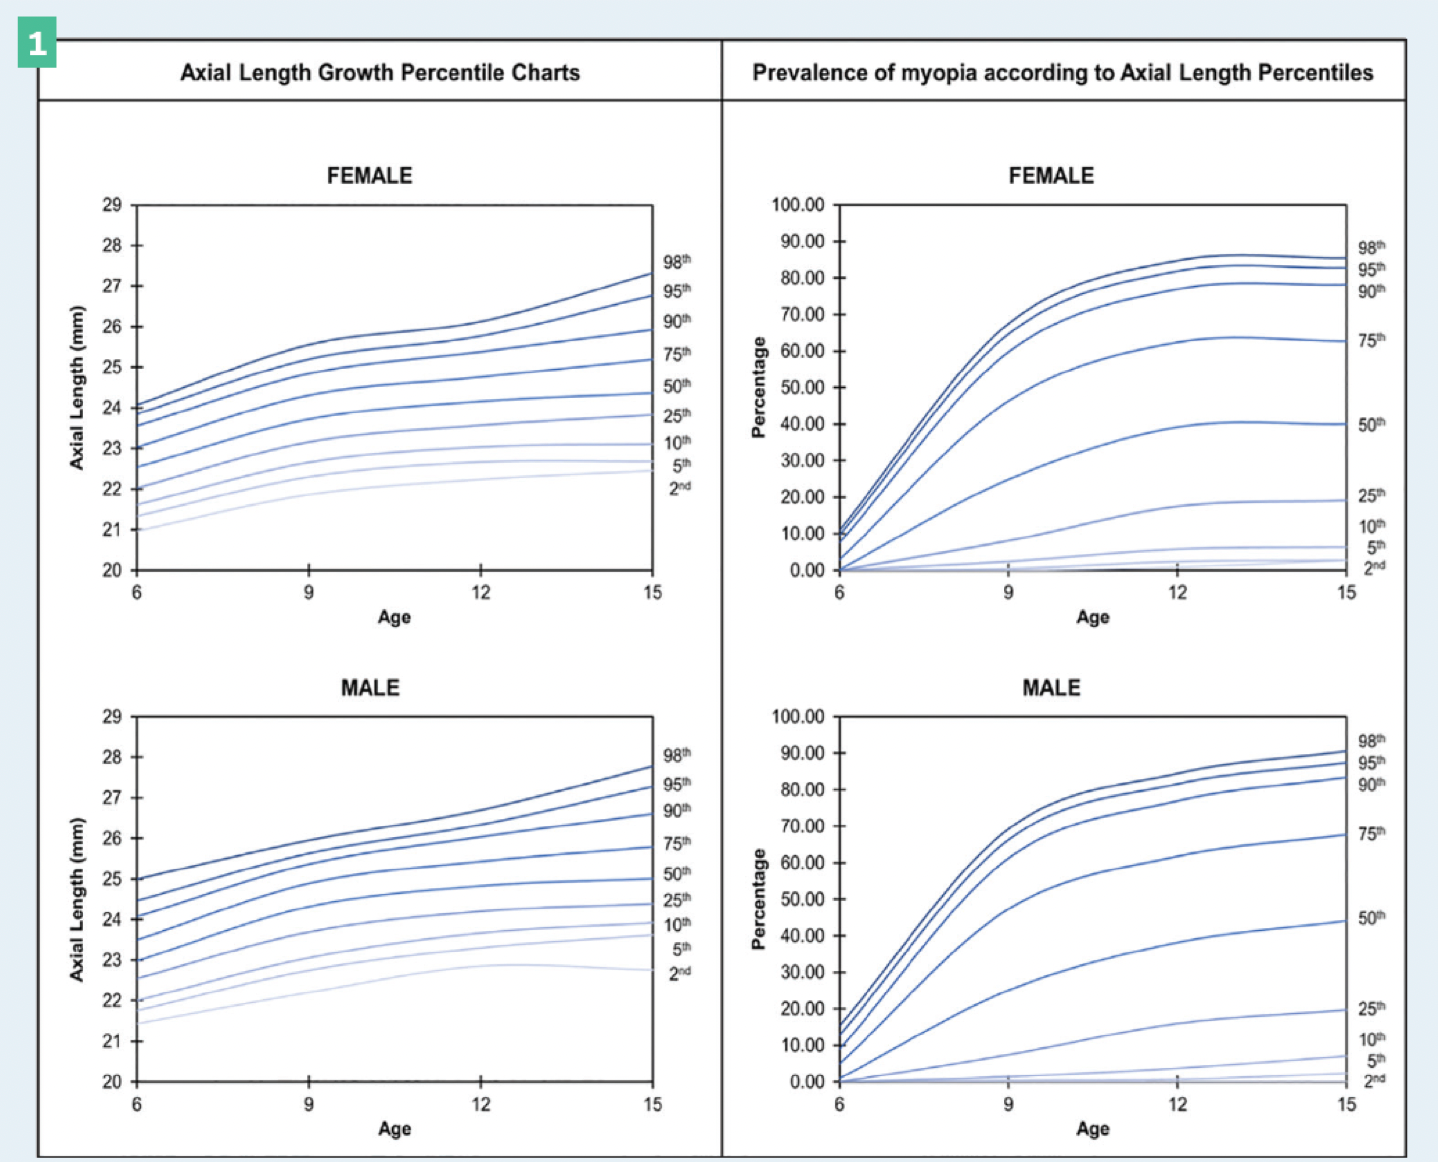 Figure 1. Axial length growth percentage charts for Chinese schoolchildren